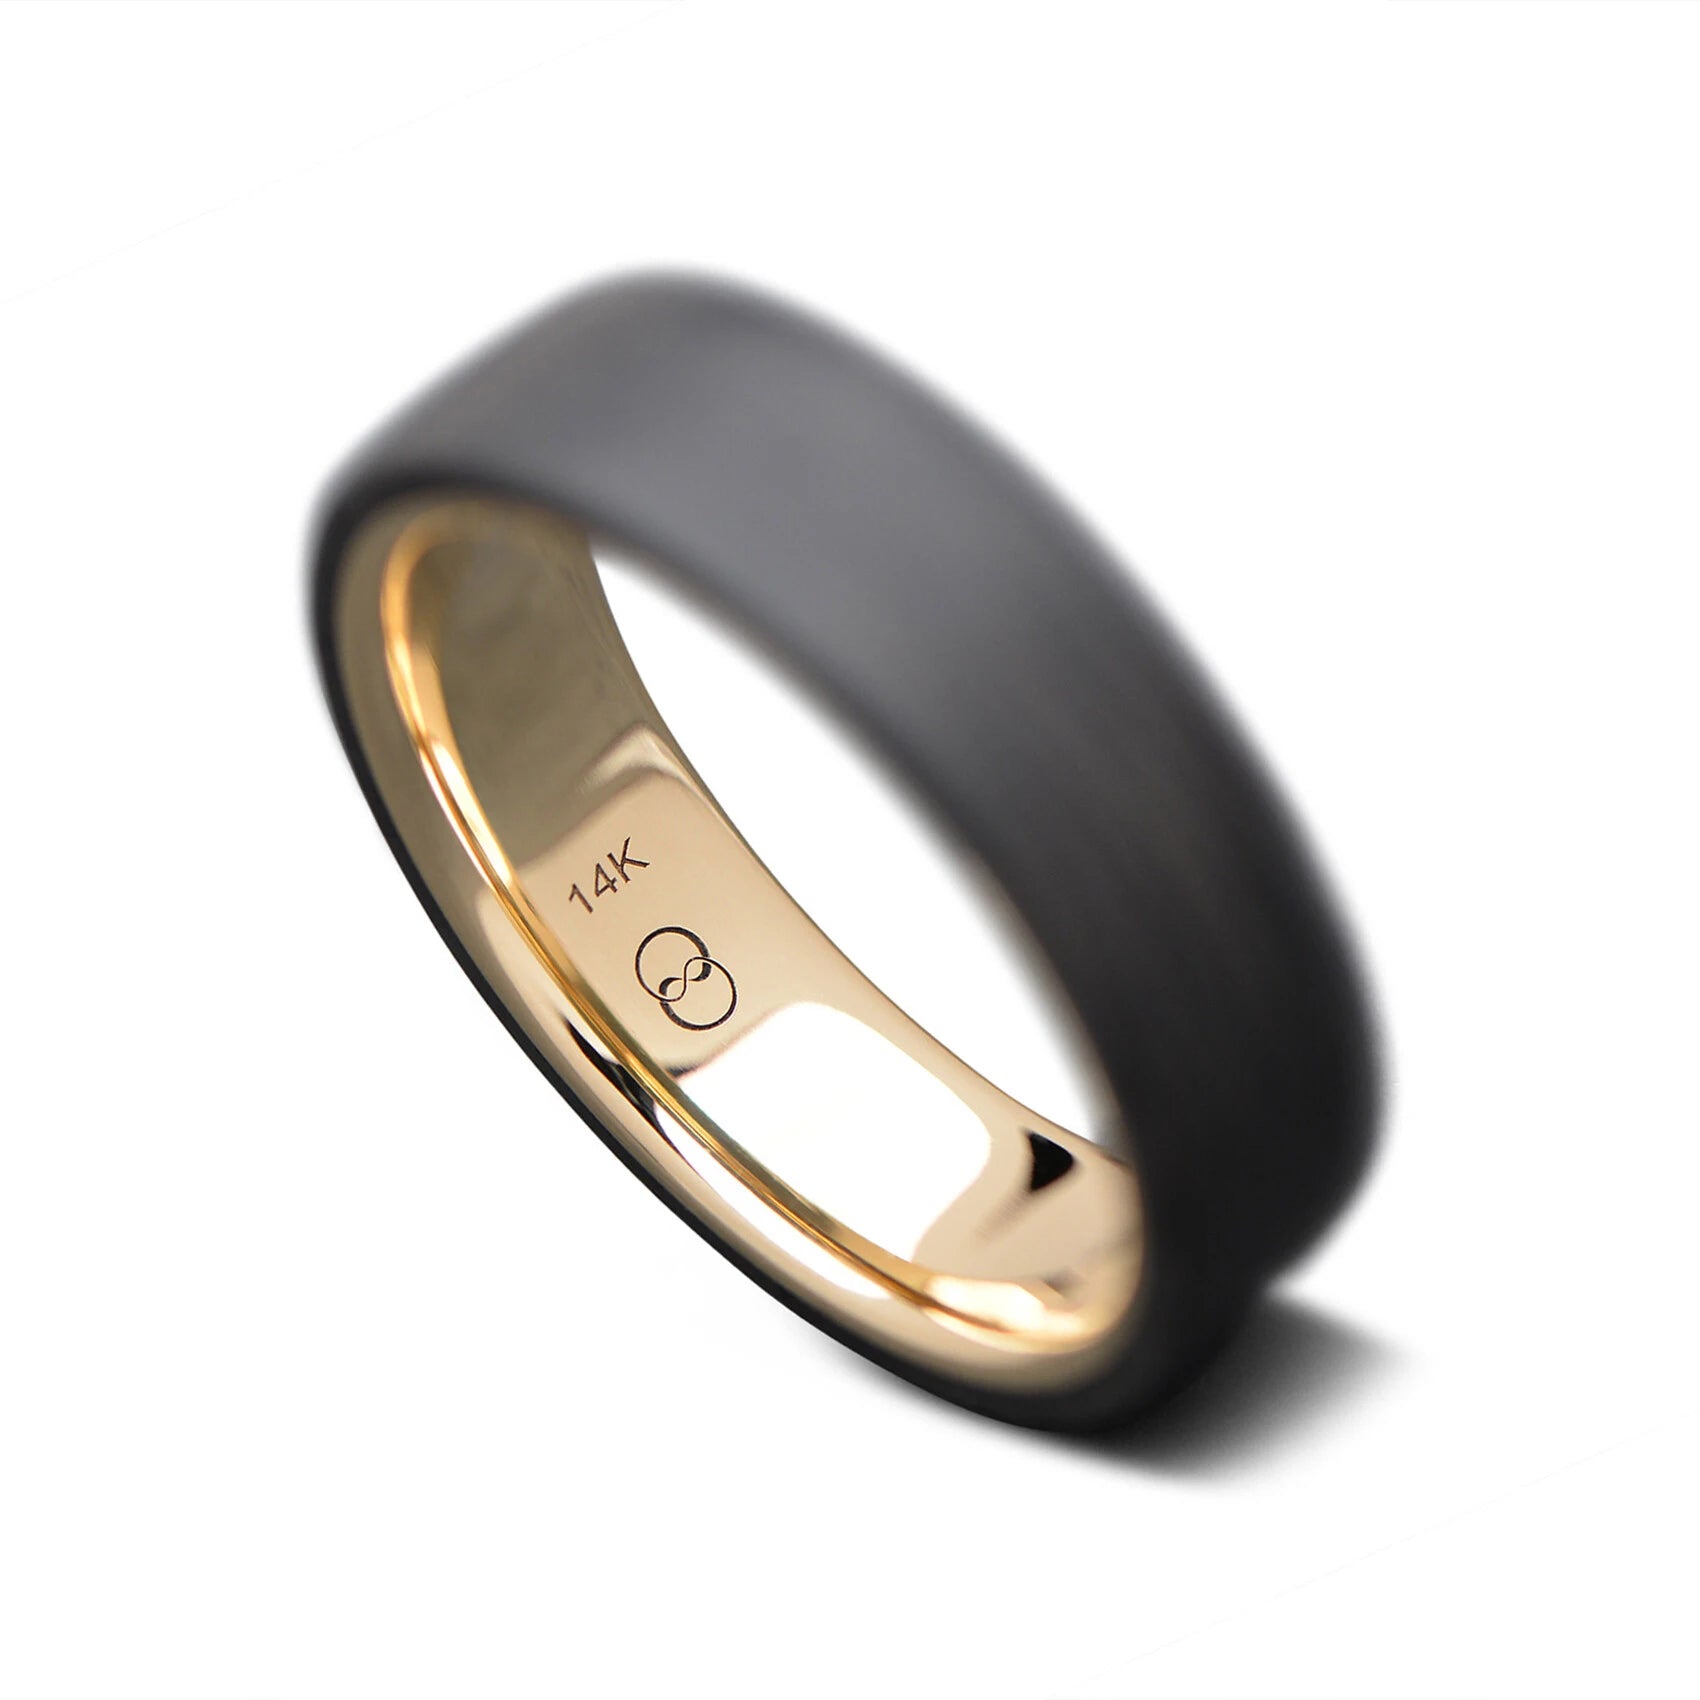 CarbonX core ring with Yellow Gold inner sleeve, 7mm -THE CROSSROADS